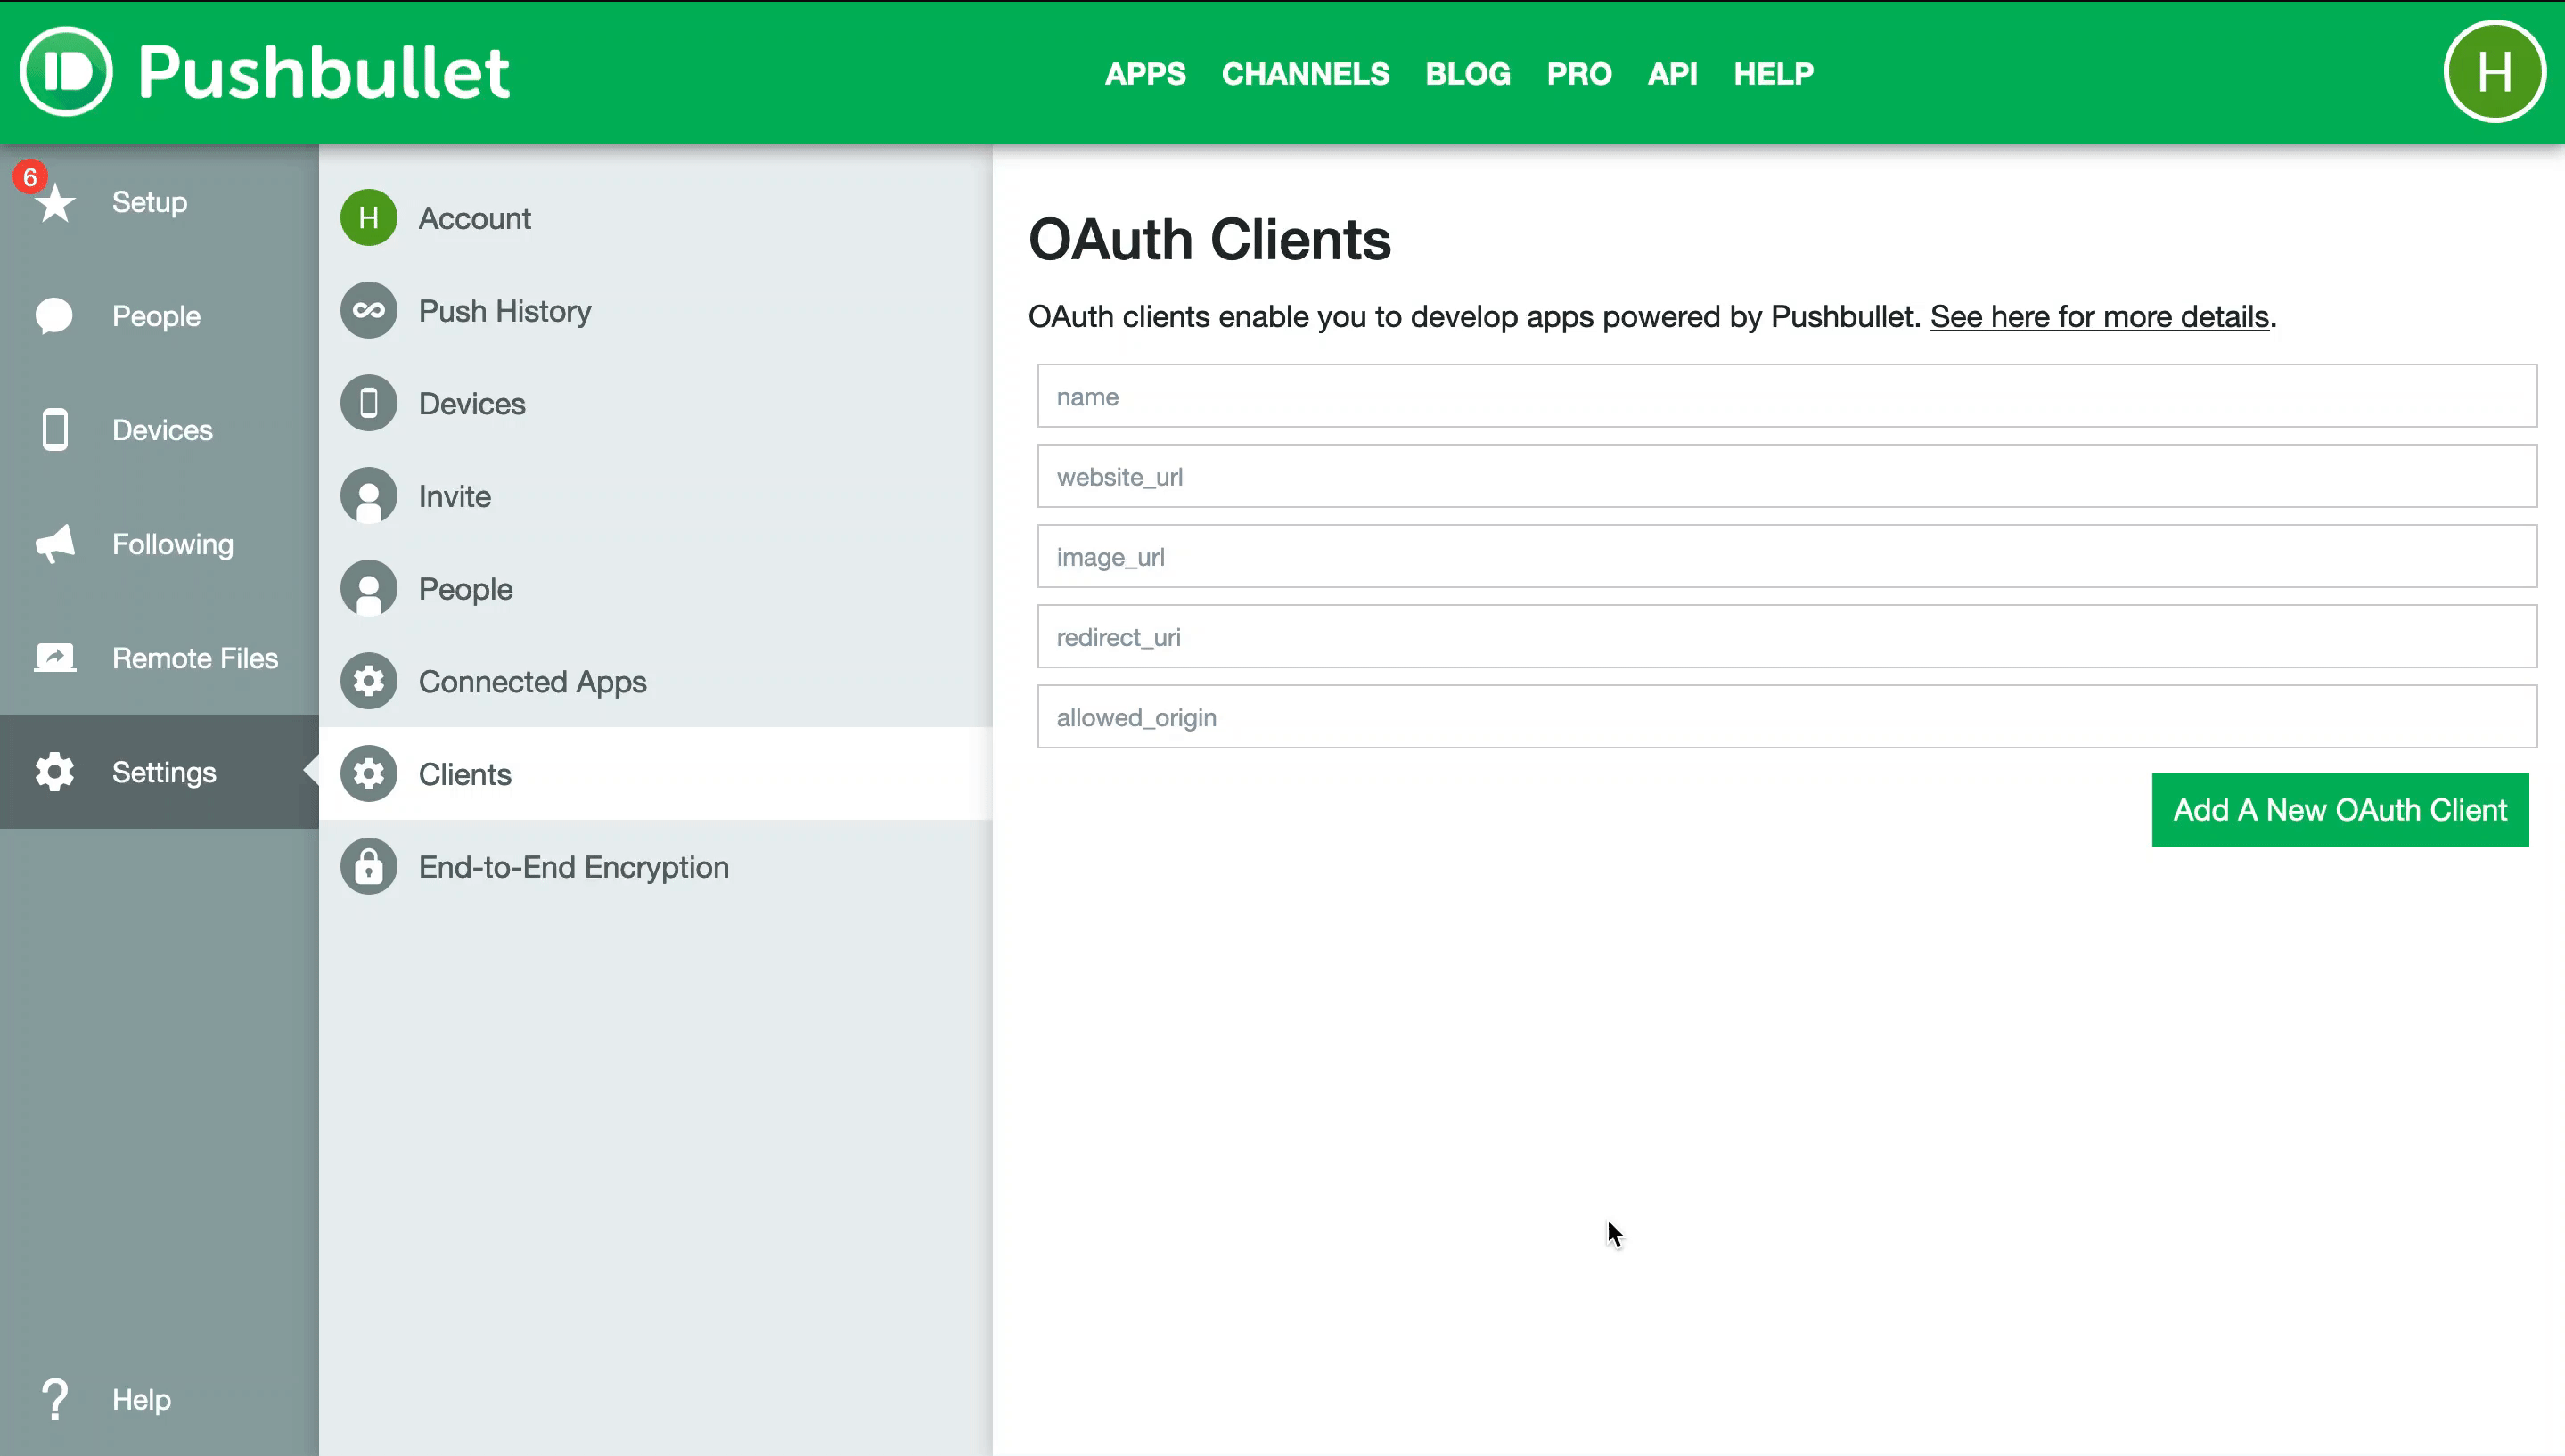 Getting Pushbullet credentials